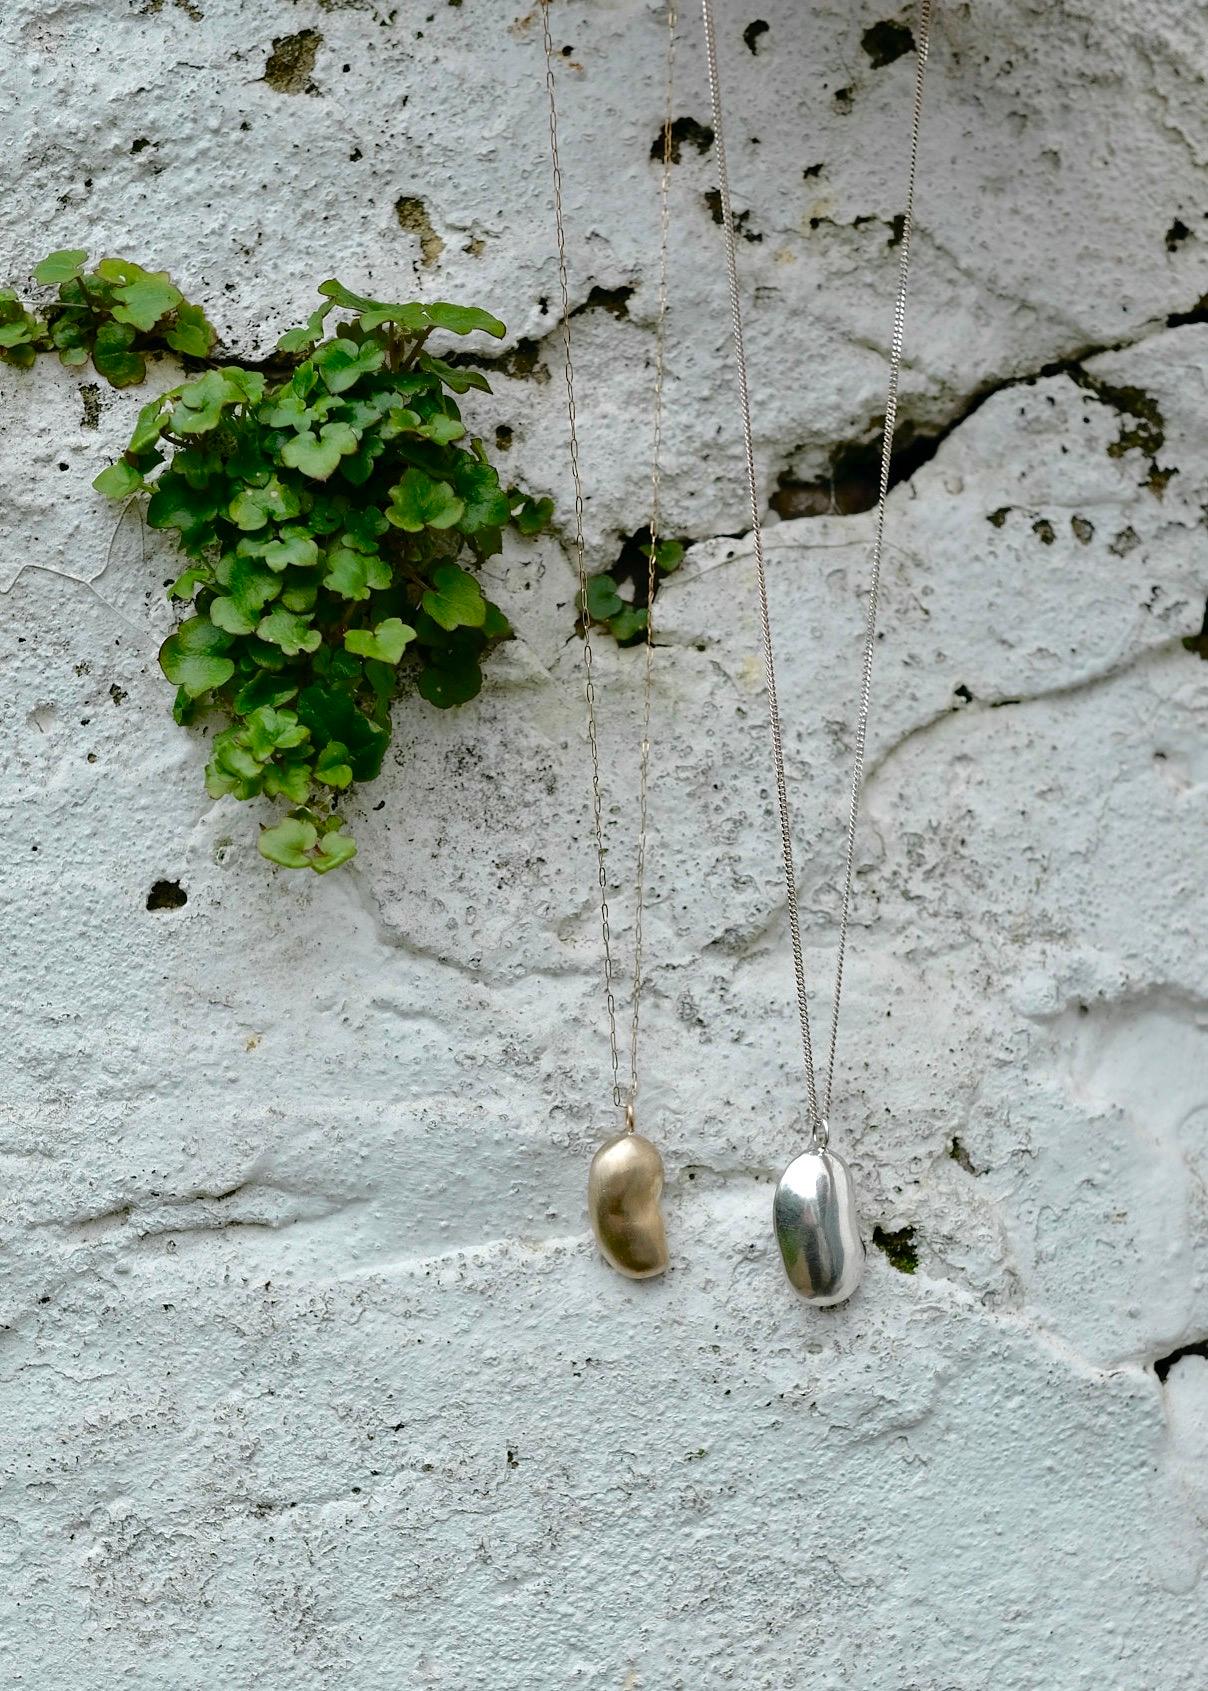 This pendant is elegantly shaped with a playful twist. 

It is cast from a real kidney bean in recycled sterling silver, and is finished with a matte sheen to subtly catch the light when worn. No two are the same. 

The 16-18